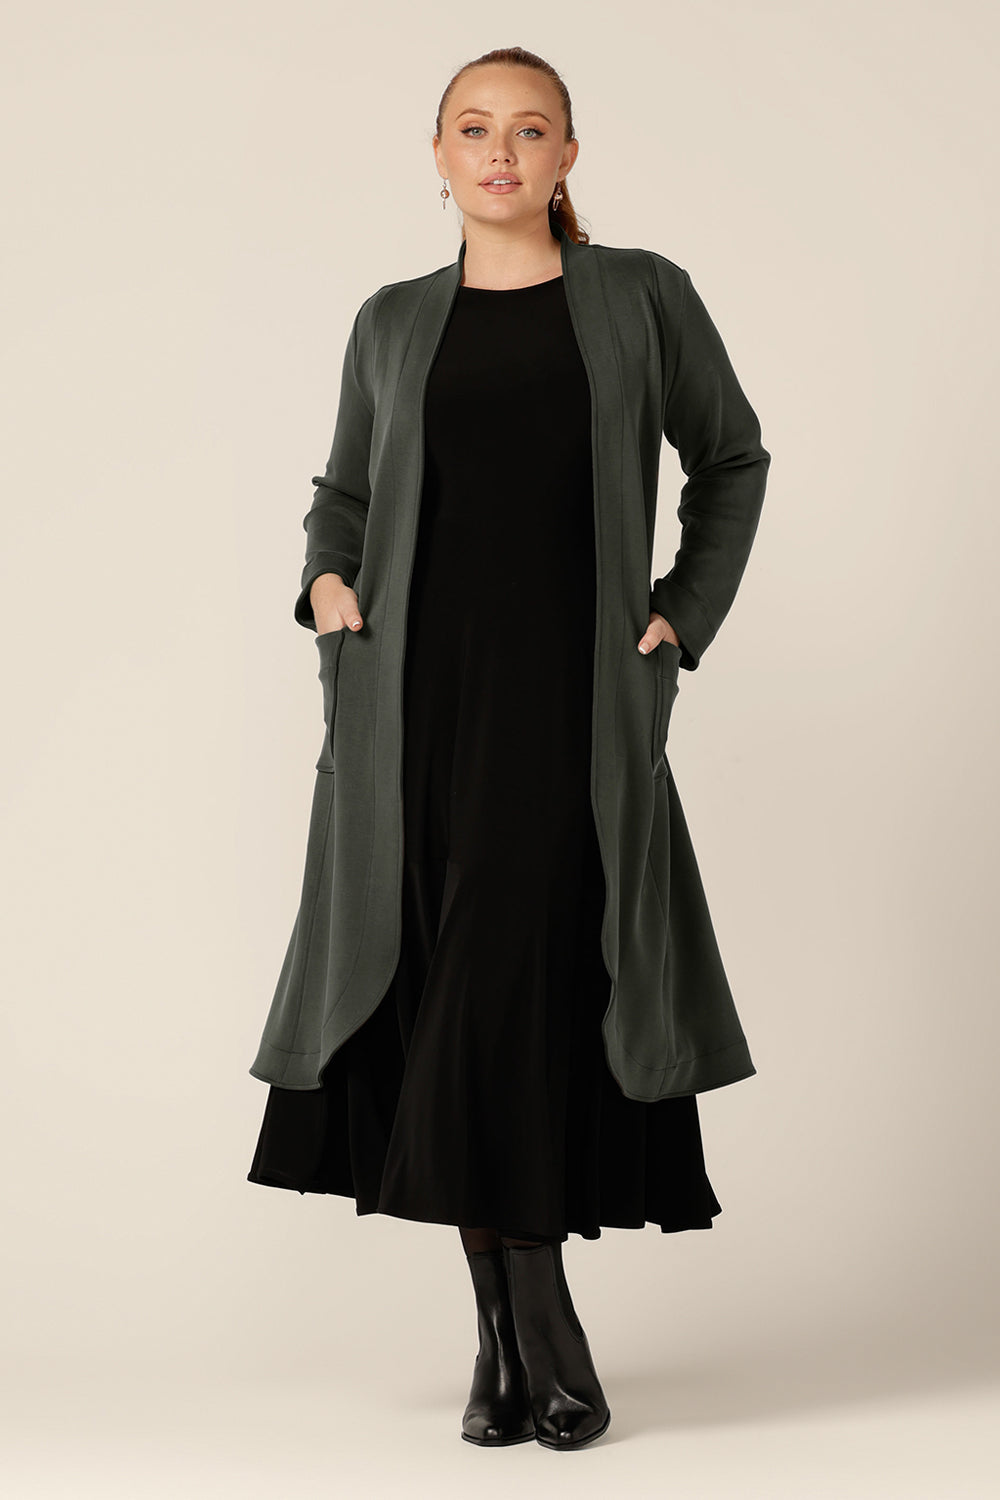 A size 12 woman wears the Marant Trenchcoat in Sage green by Australian and New Zealand women's clothing company, L&F. A collarless, open fronted coat with tie belt and patch pockets, this classic green coat is worn with a 3/4 sleeve, reversible black dress.